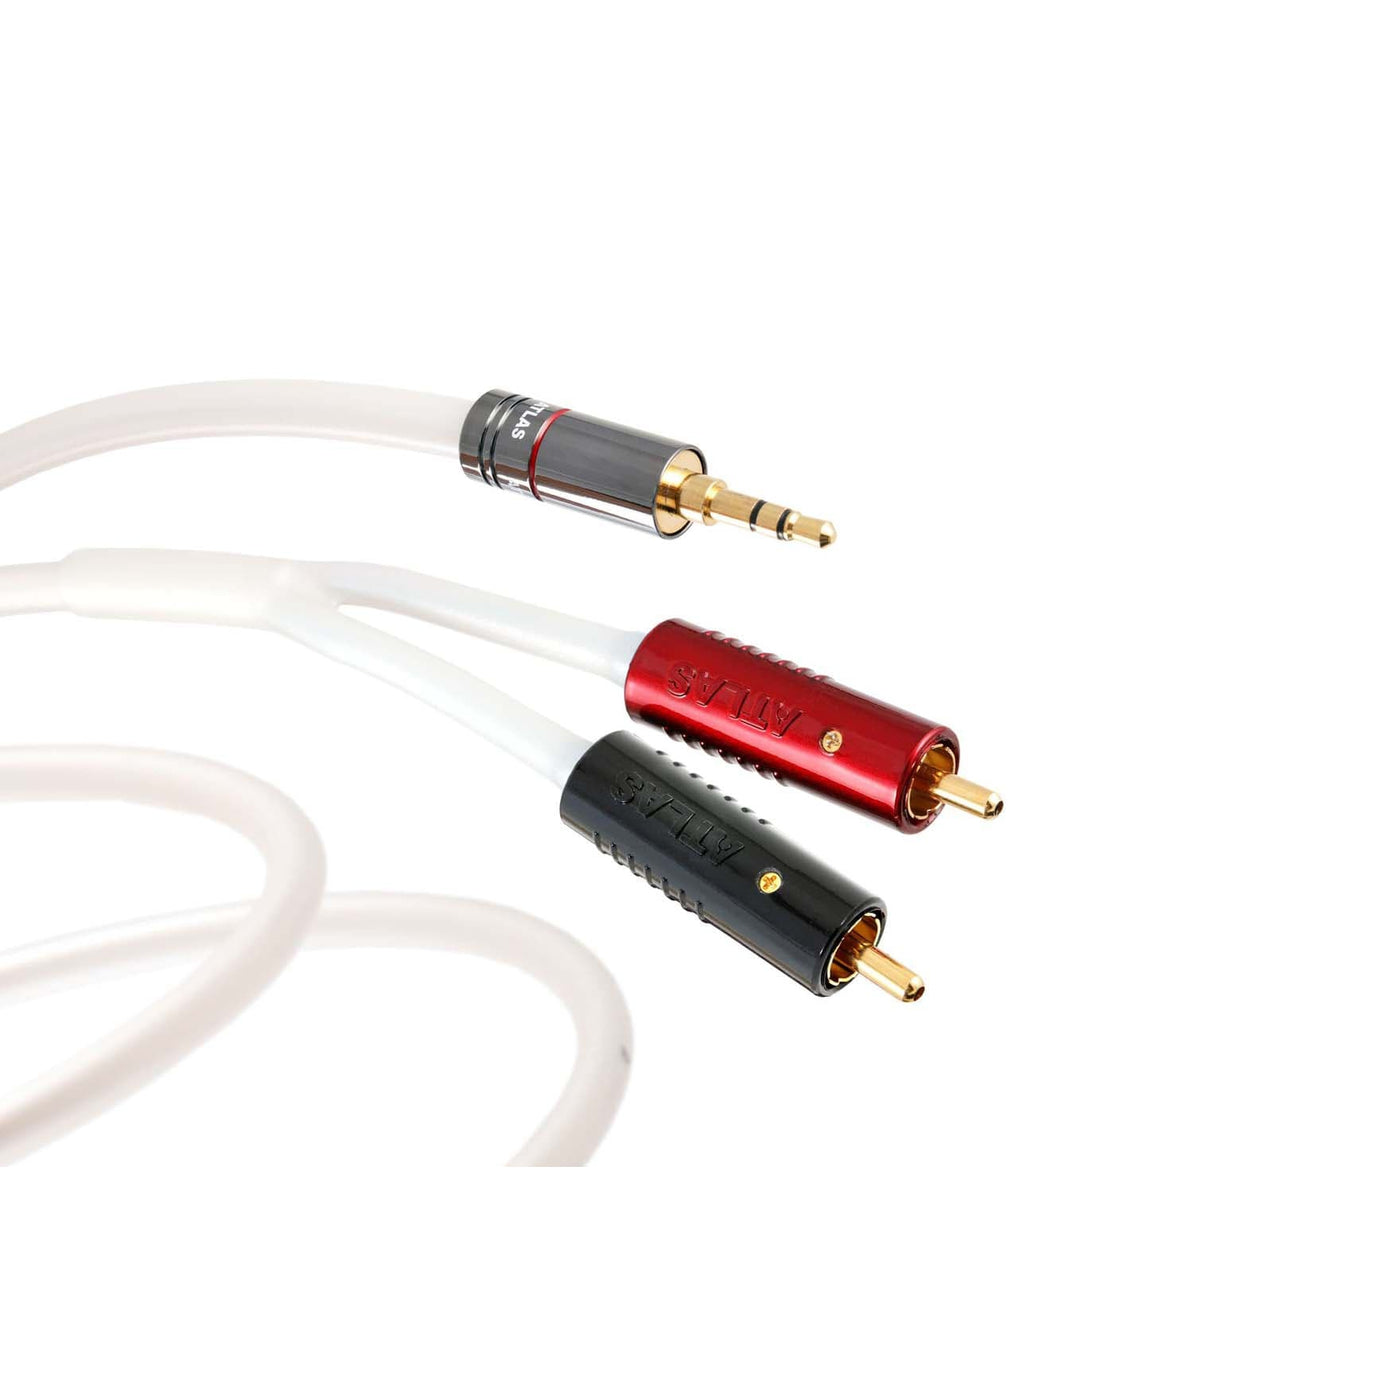 Atlas Element Metik 3.5mm - Achromatic RCA 1:2 Cable at Audio Influence